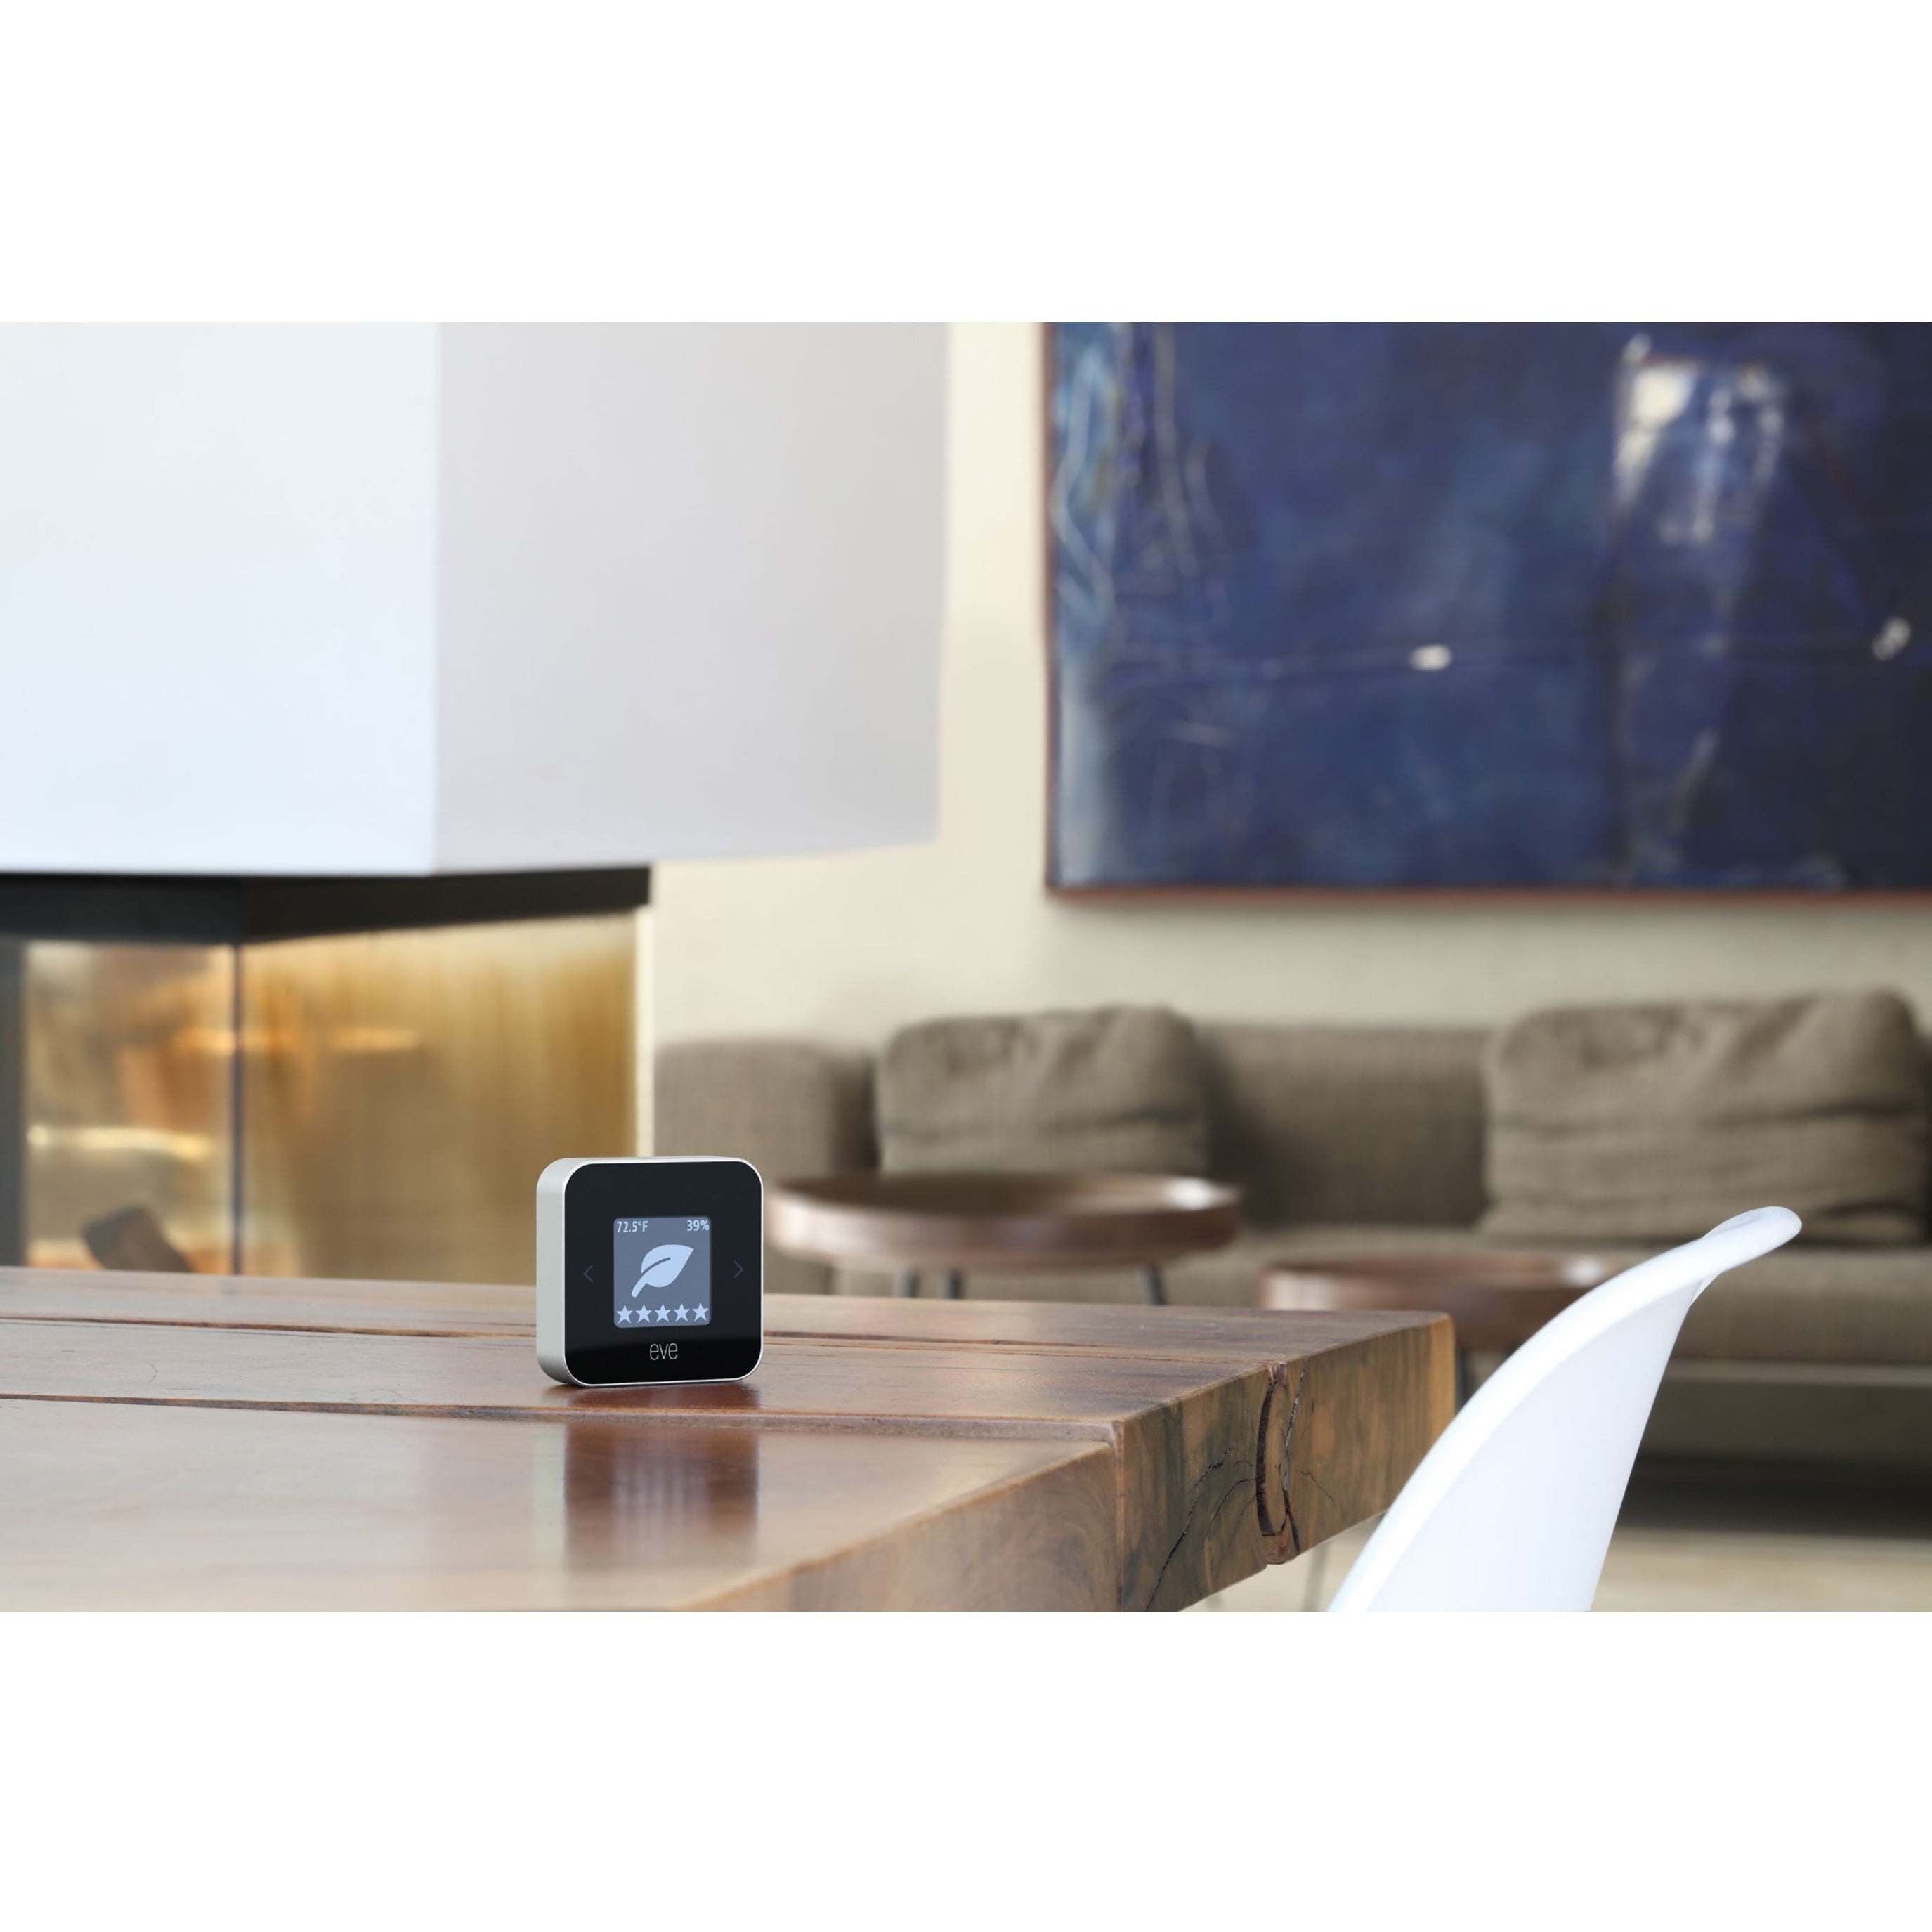  Eve Room - Indoor air quality sensor to monitor air quality  (VOC), temperature & humidity, Apple HomeKit technology, Bluetooth and  Thread : Industrial & Scientific